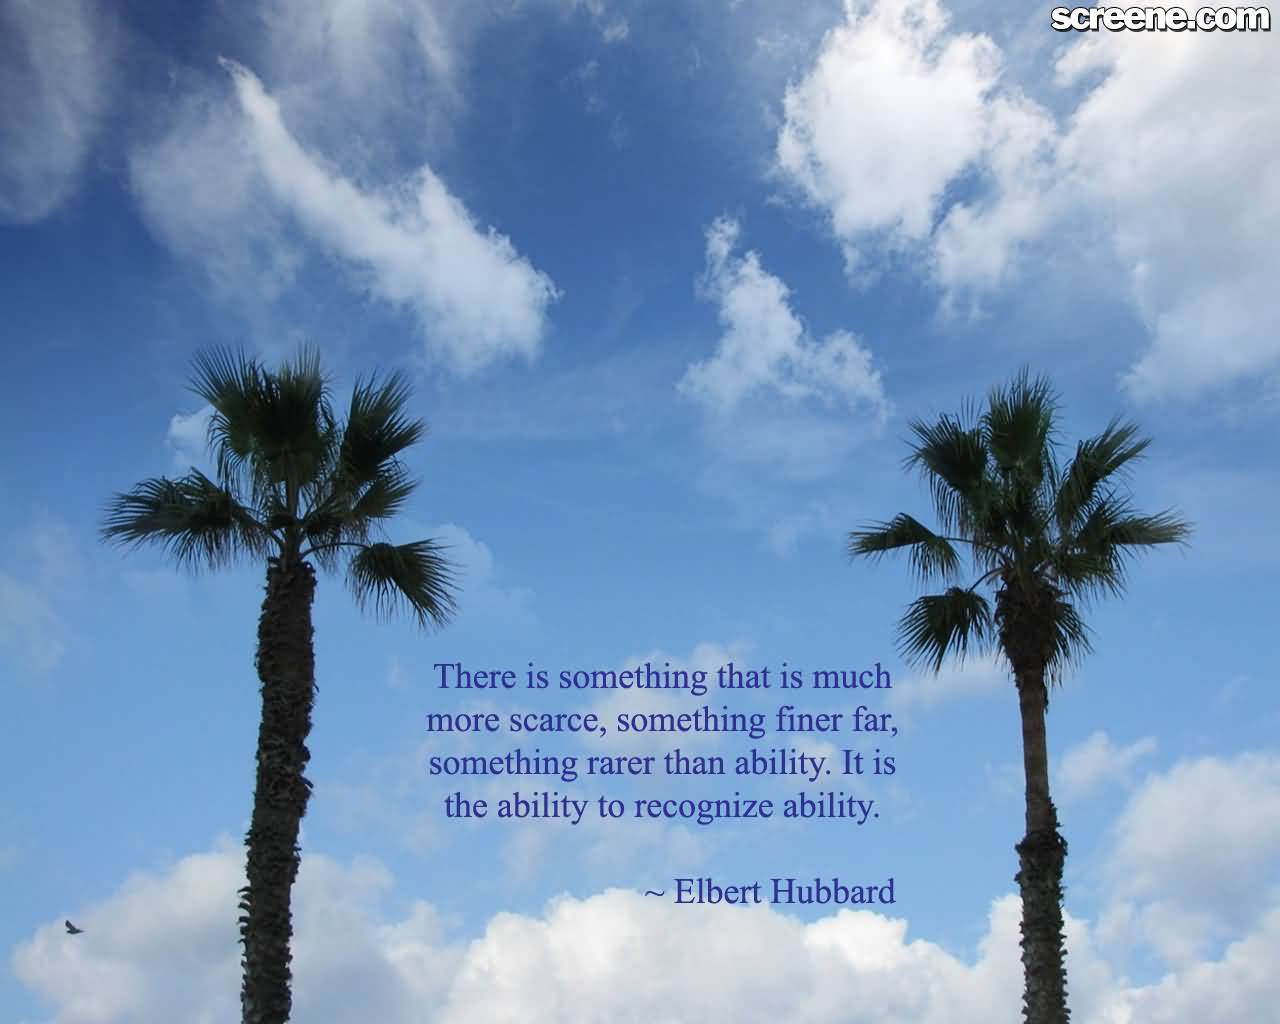 There is something that is much more scarce, something finer far, something rarer than ability. It is the ability to recognize ability. - Elbert Hubbard